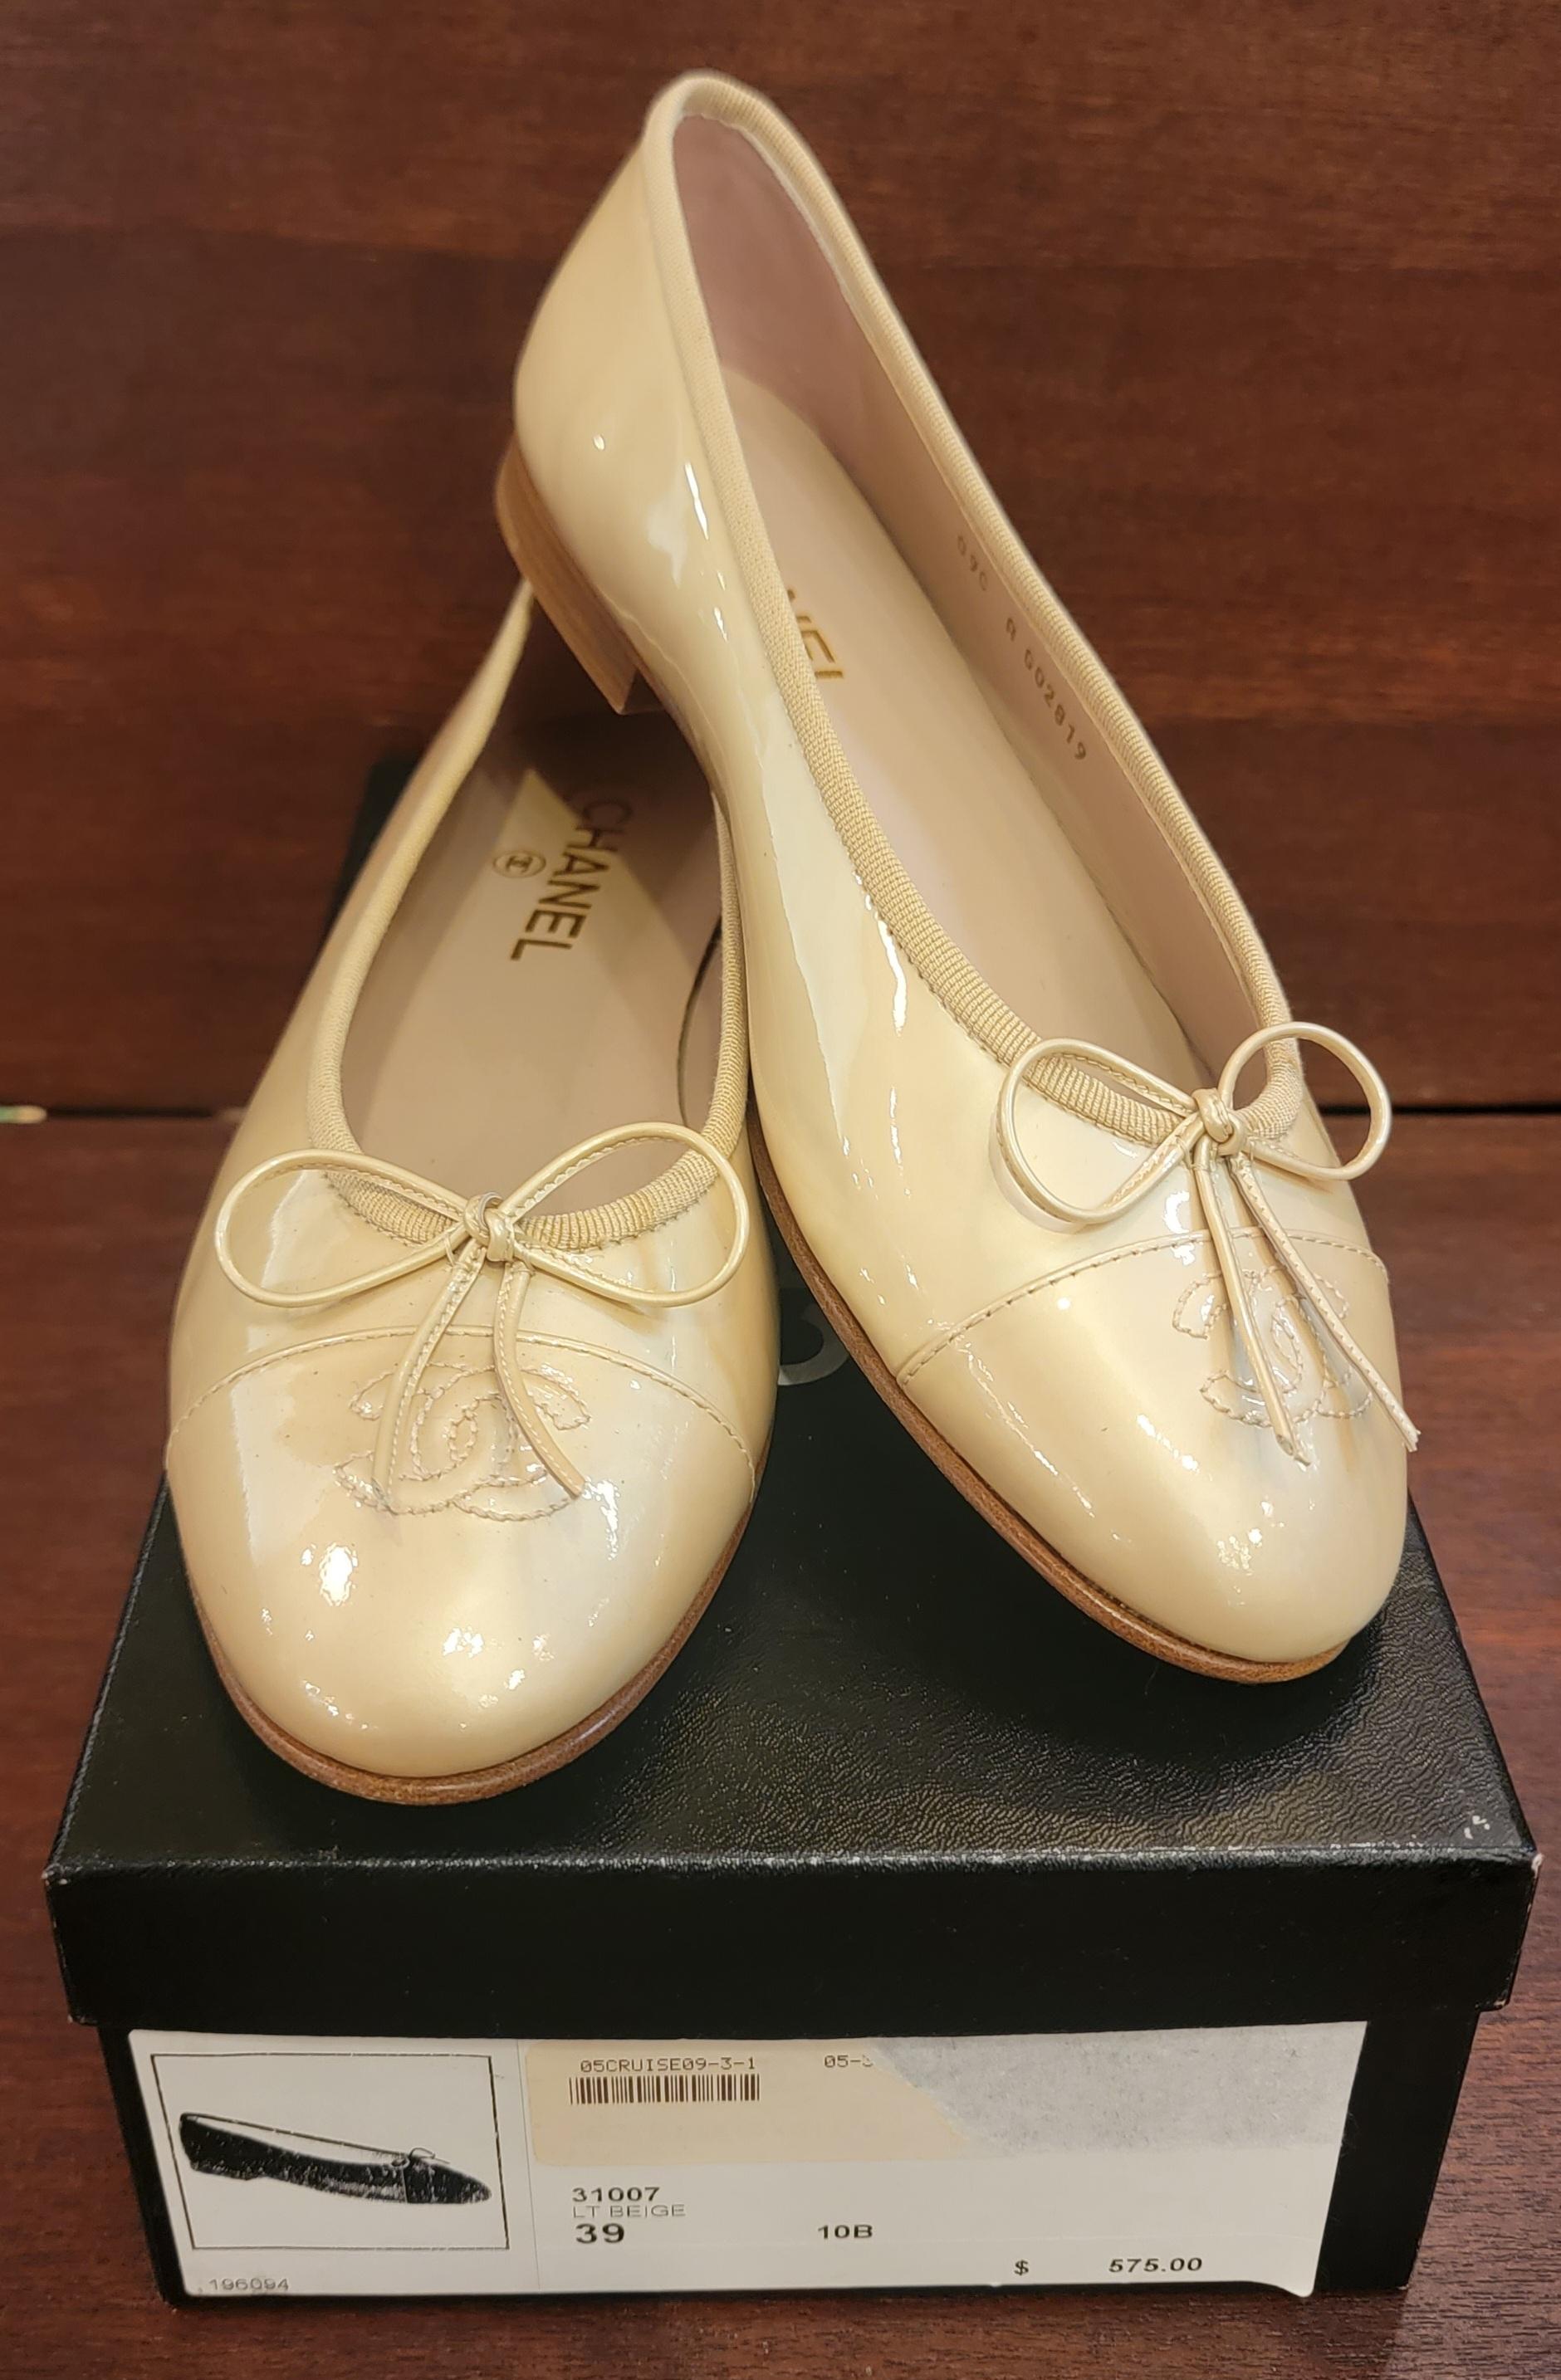 Rare Brand New Chanel Ballerina Size 39 Tan Bow Tie Shoes For Sale 1